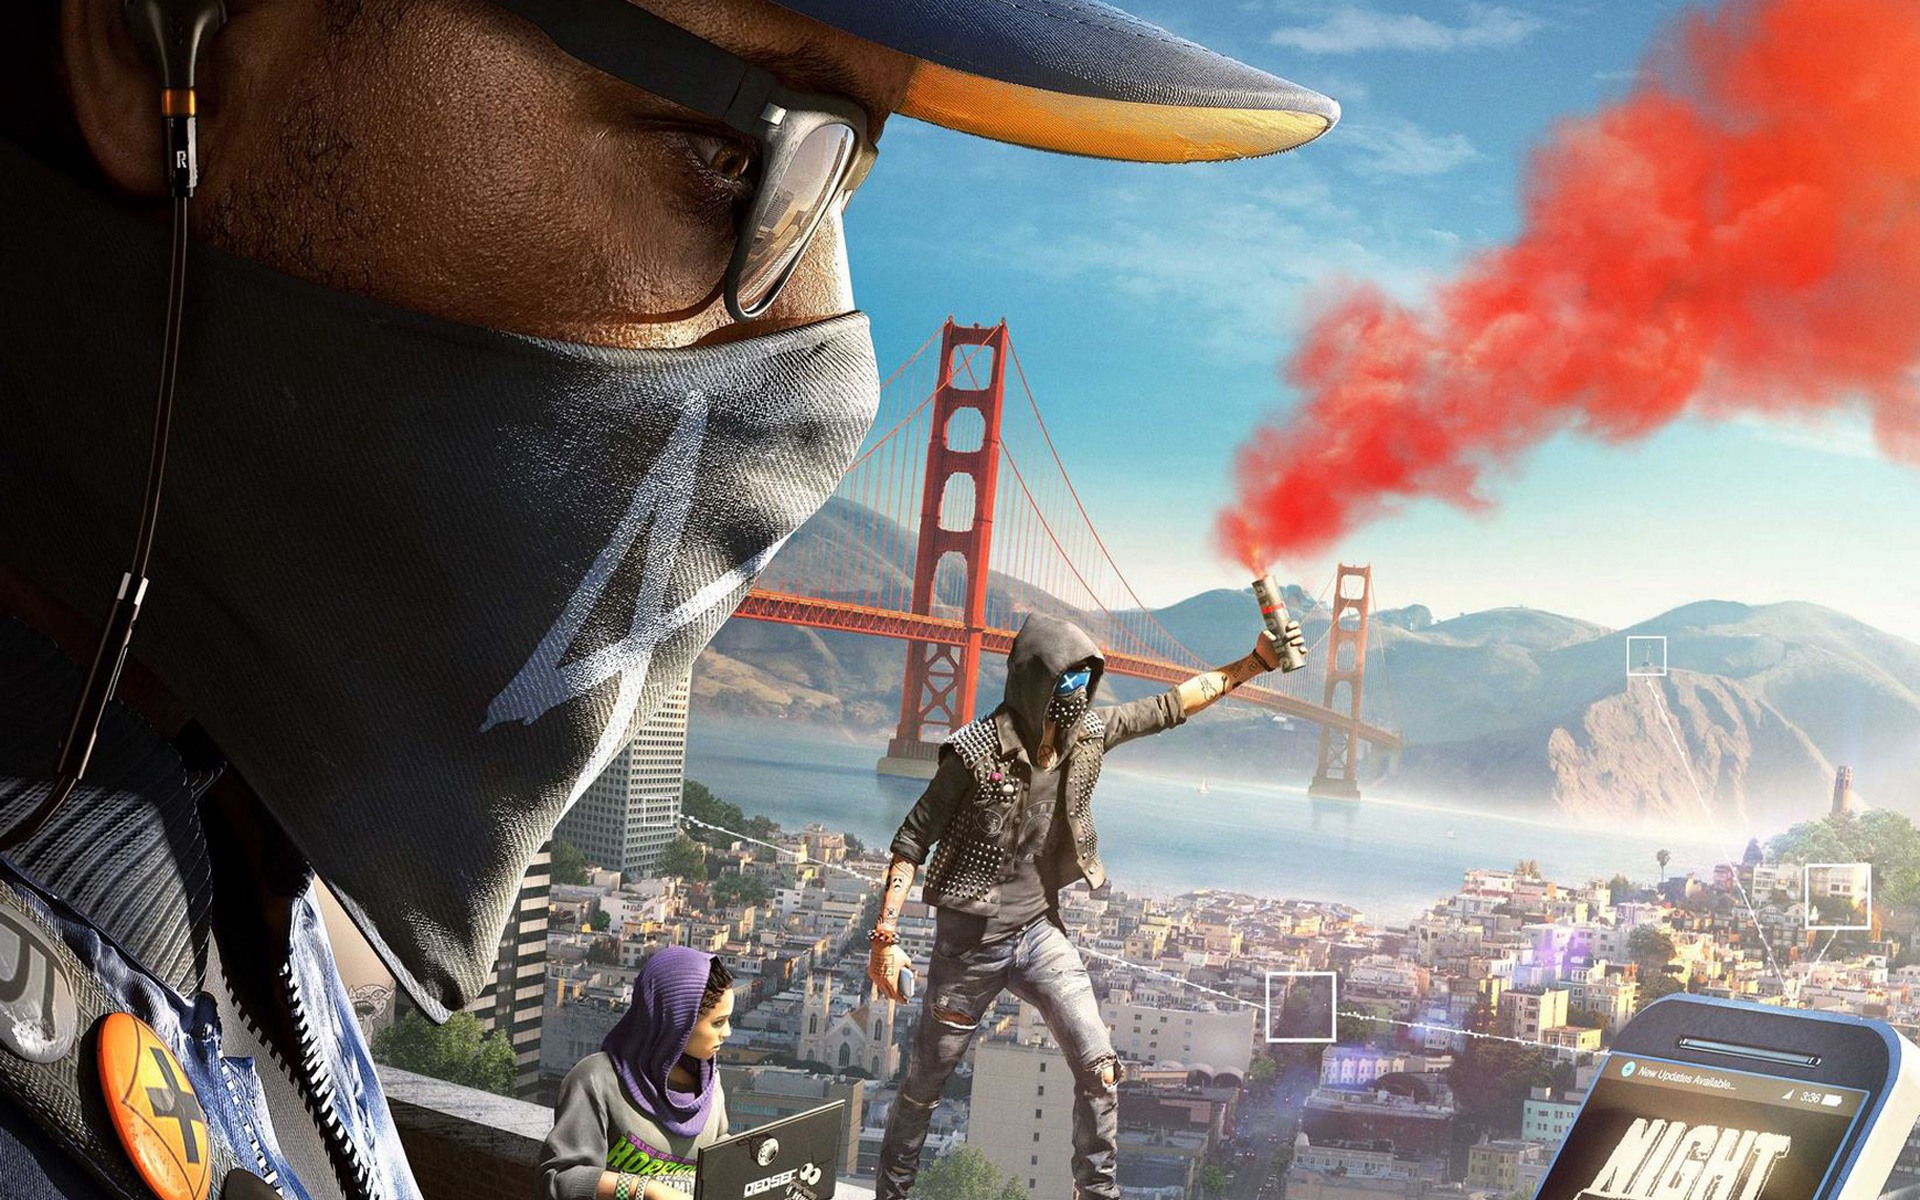 watch dogs 2, video game, marcus holloway, sitara dhawan, wrench (watch dogs), watch dogs